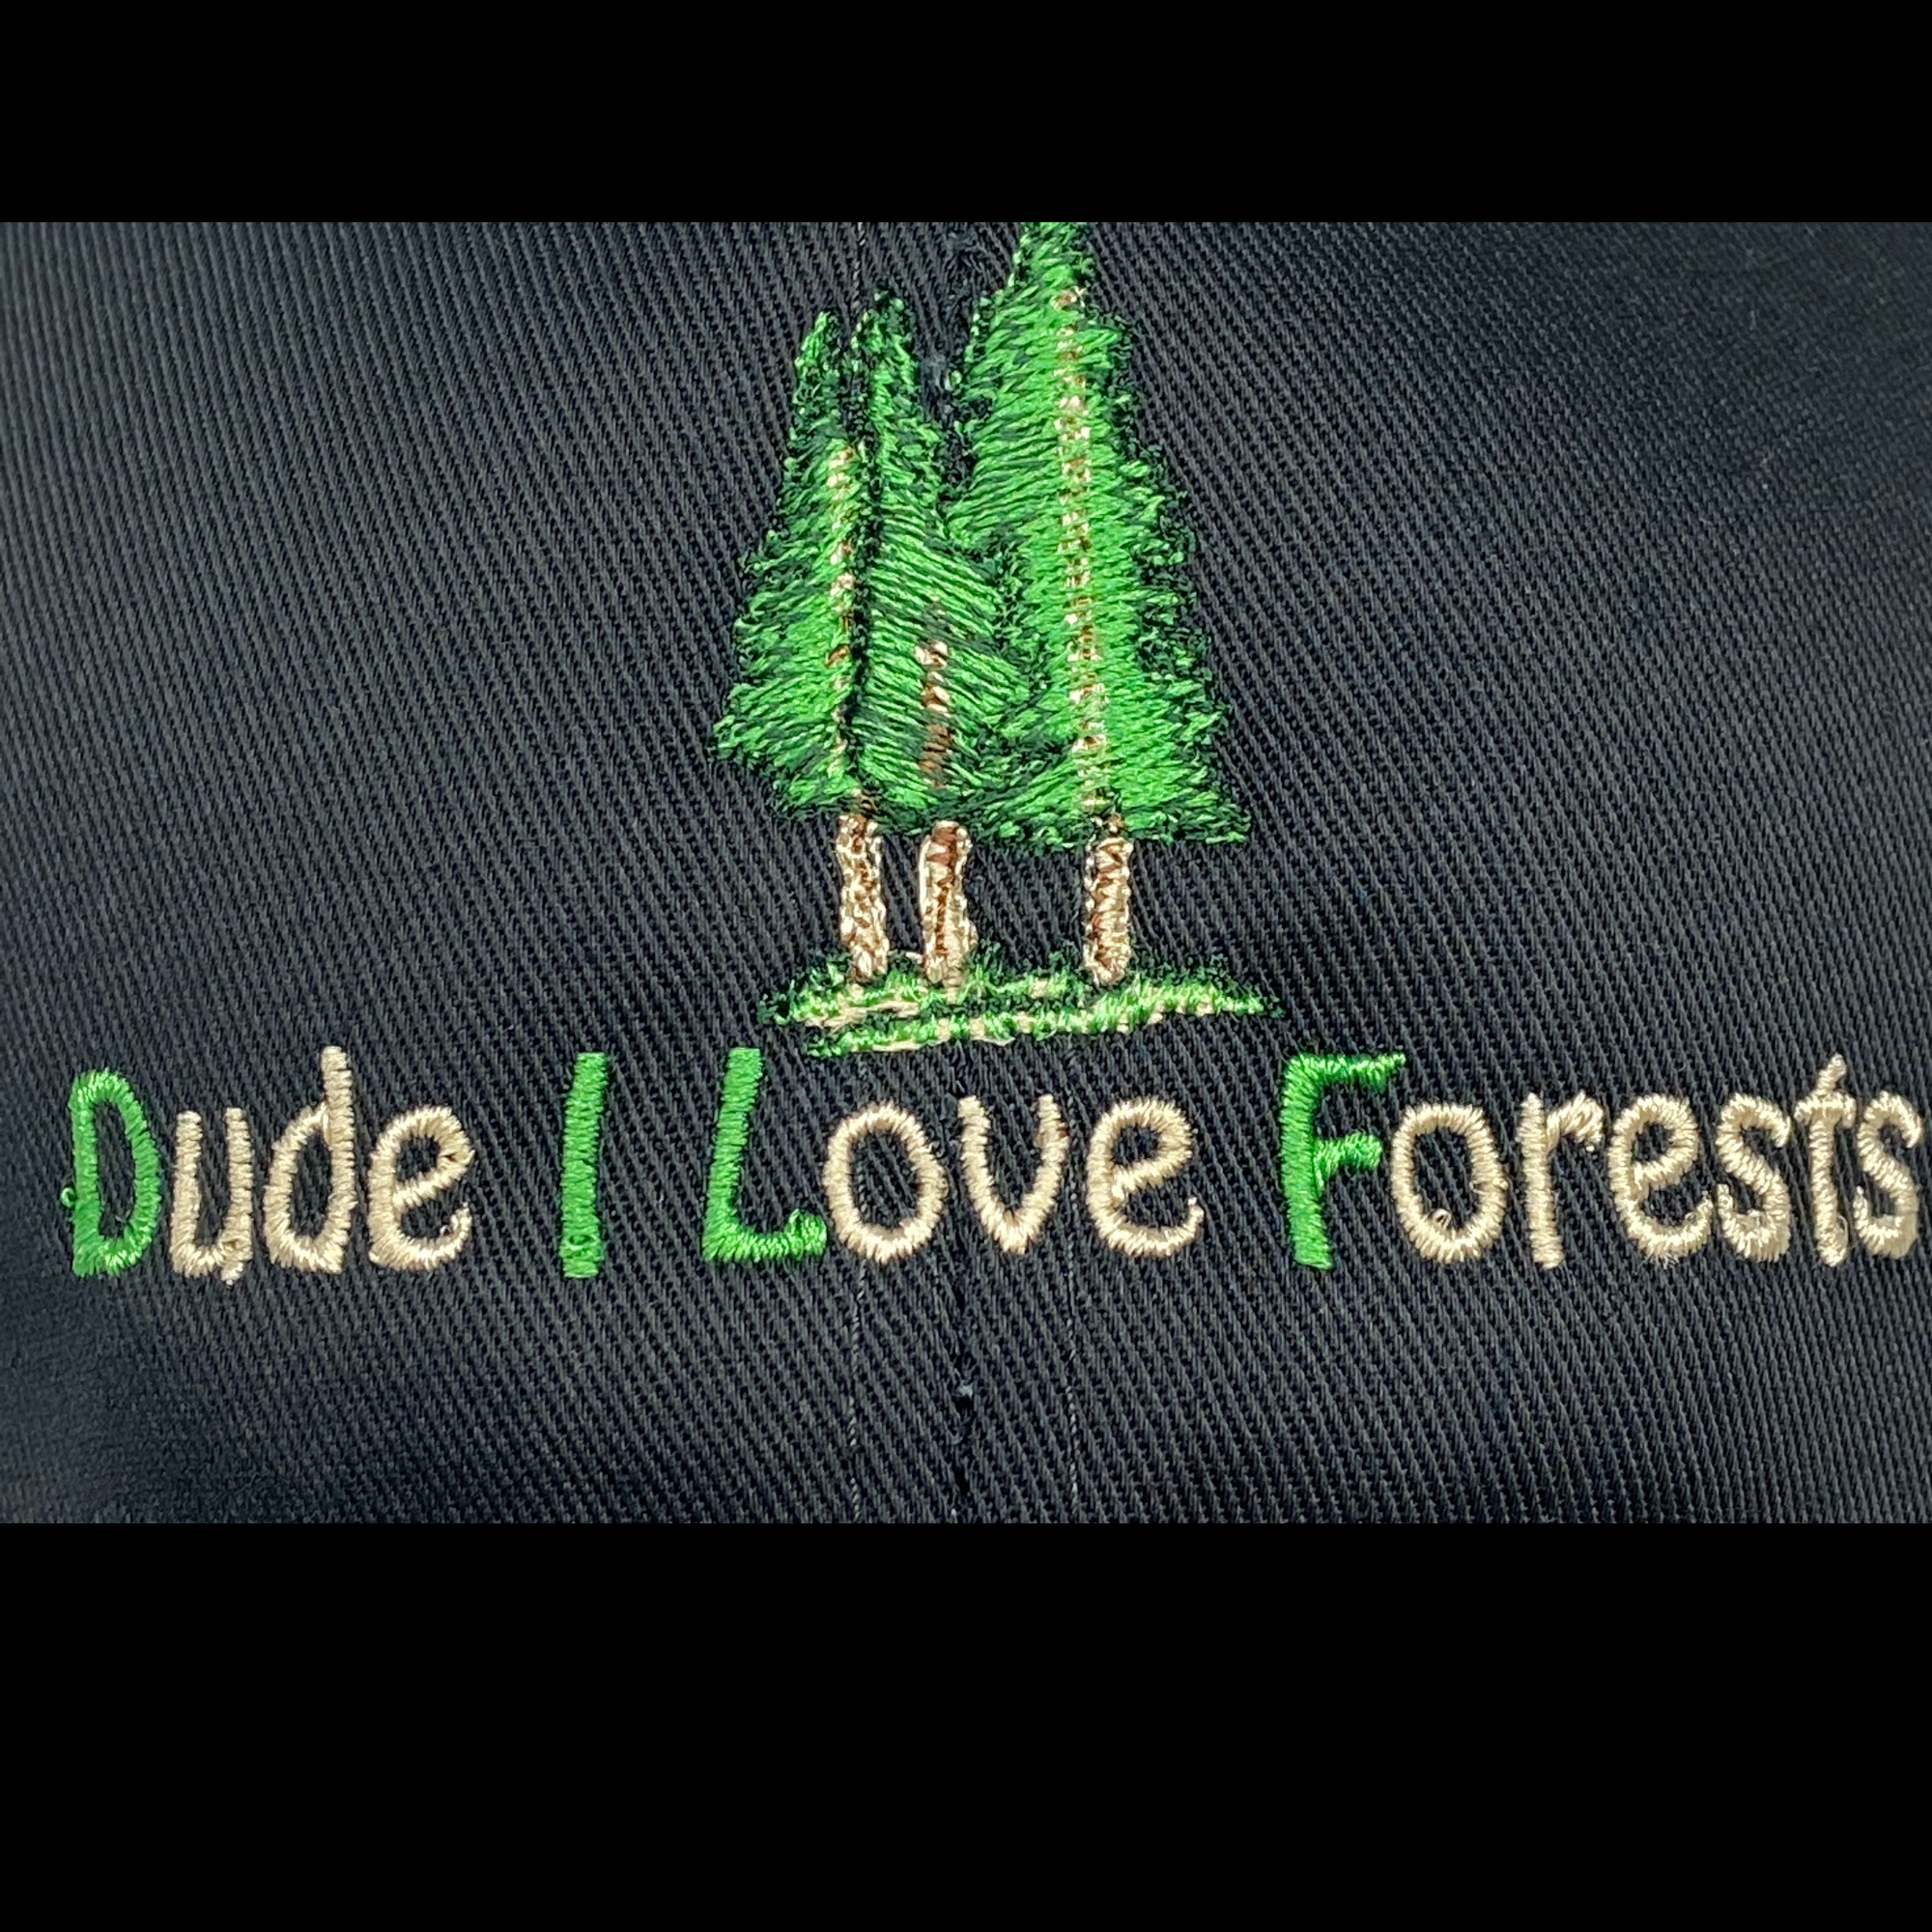 Dude I Love Forests DILF Embroidered Black Dad Hat, One Size Fits All